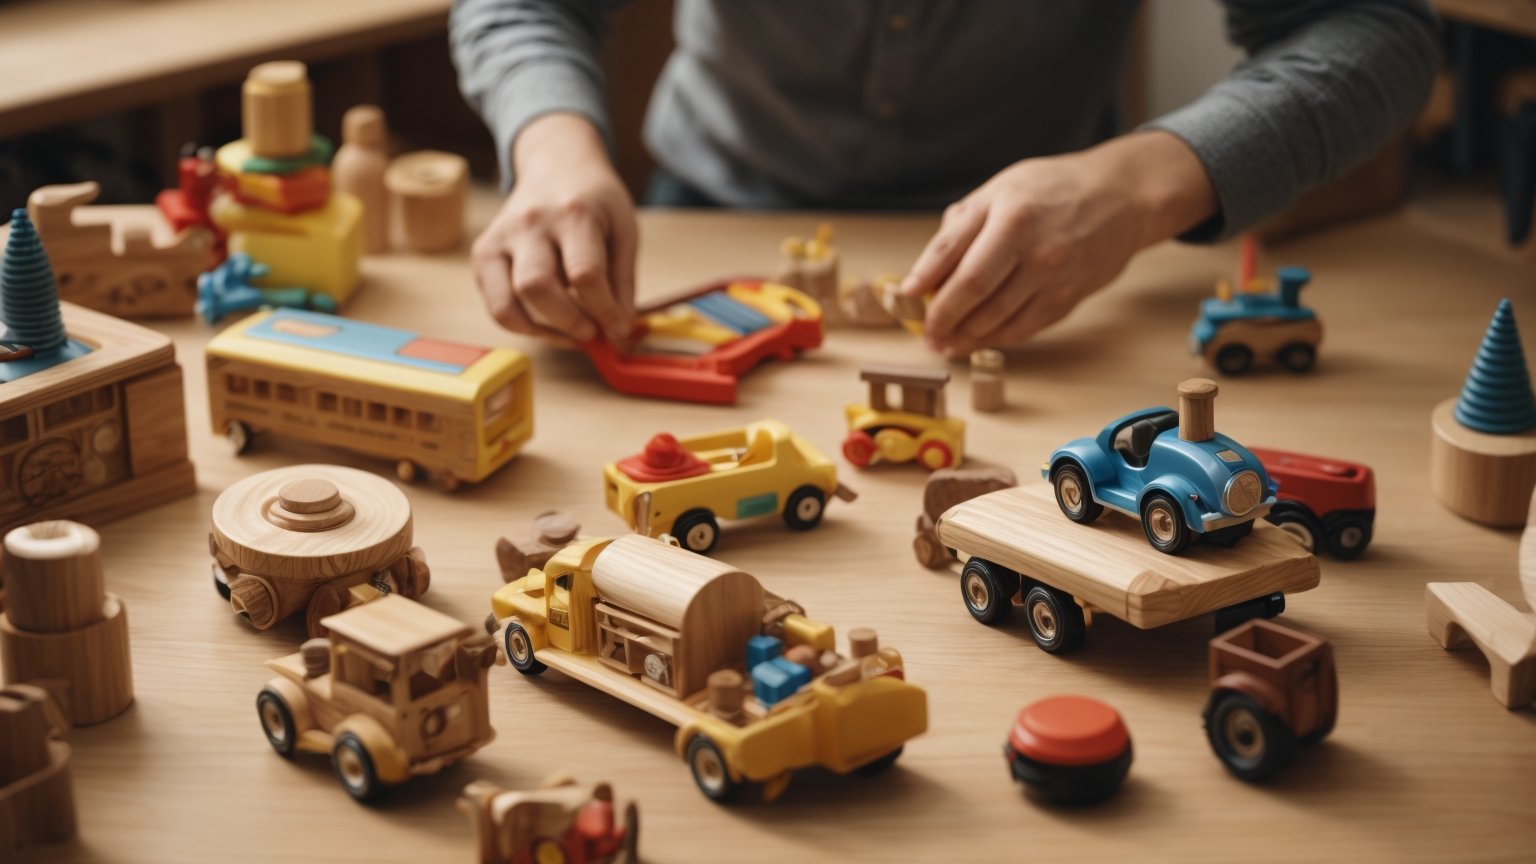 Why Are Montessori Toys Wooden? Exploring the Benefits of Natural Materials